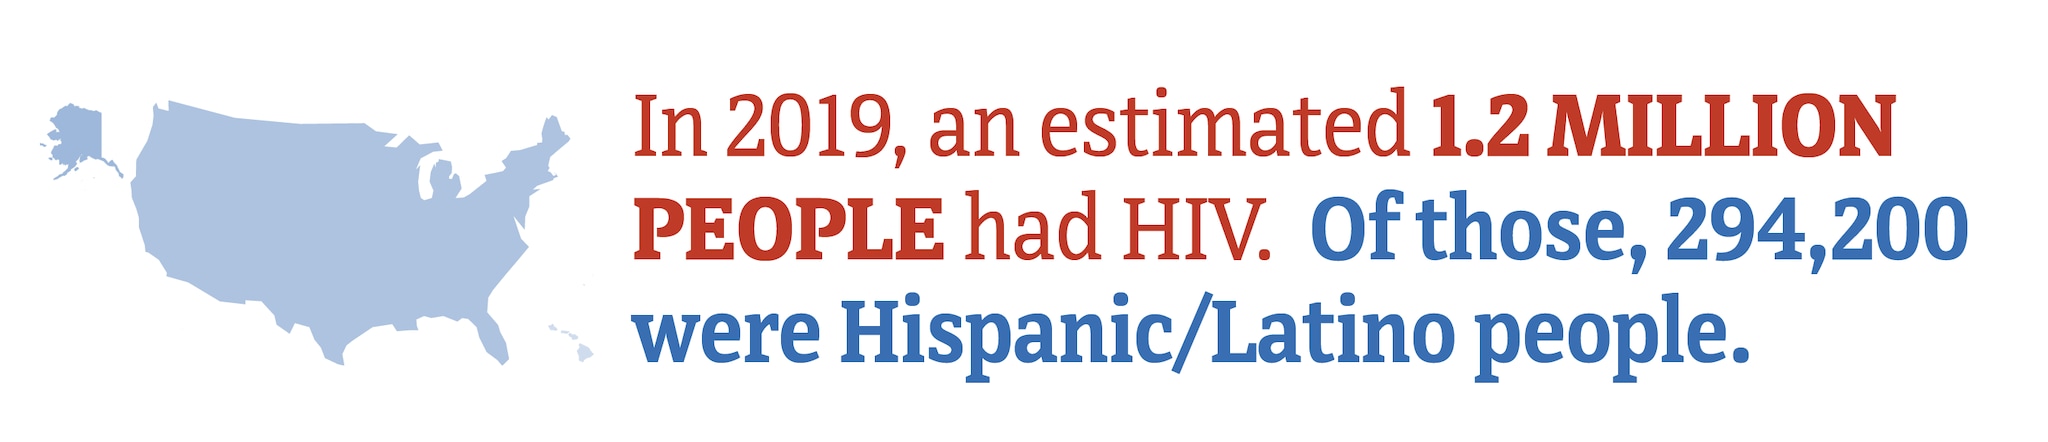 This chart shows in 2019, an estimated 294,200 Hispanic/Latino people had HIV in the US.